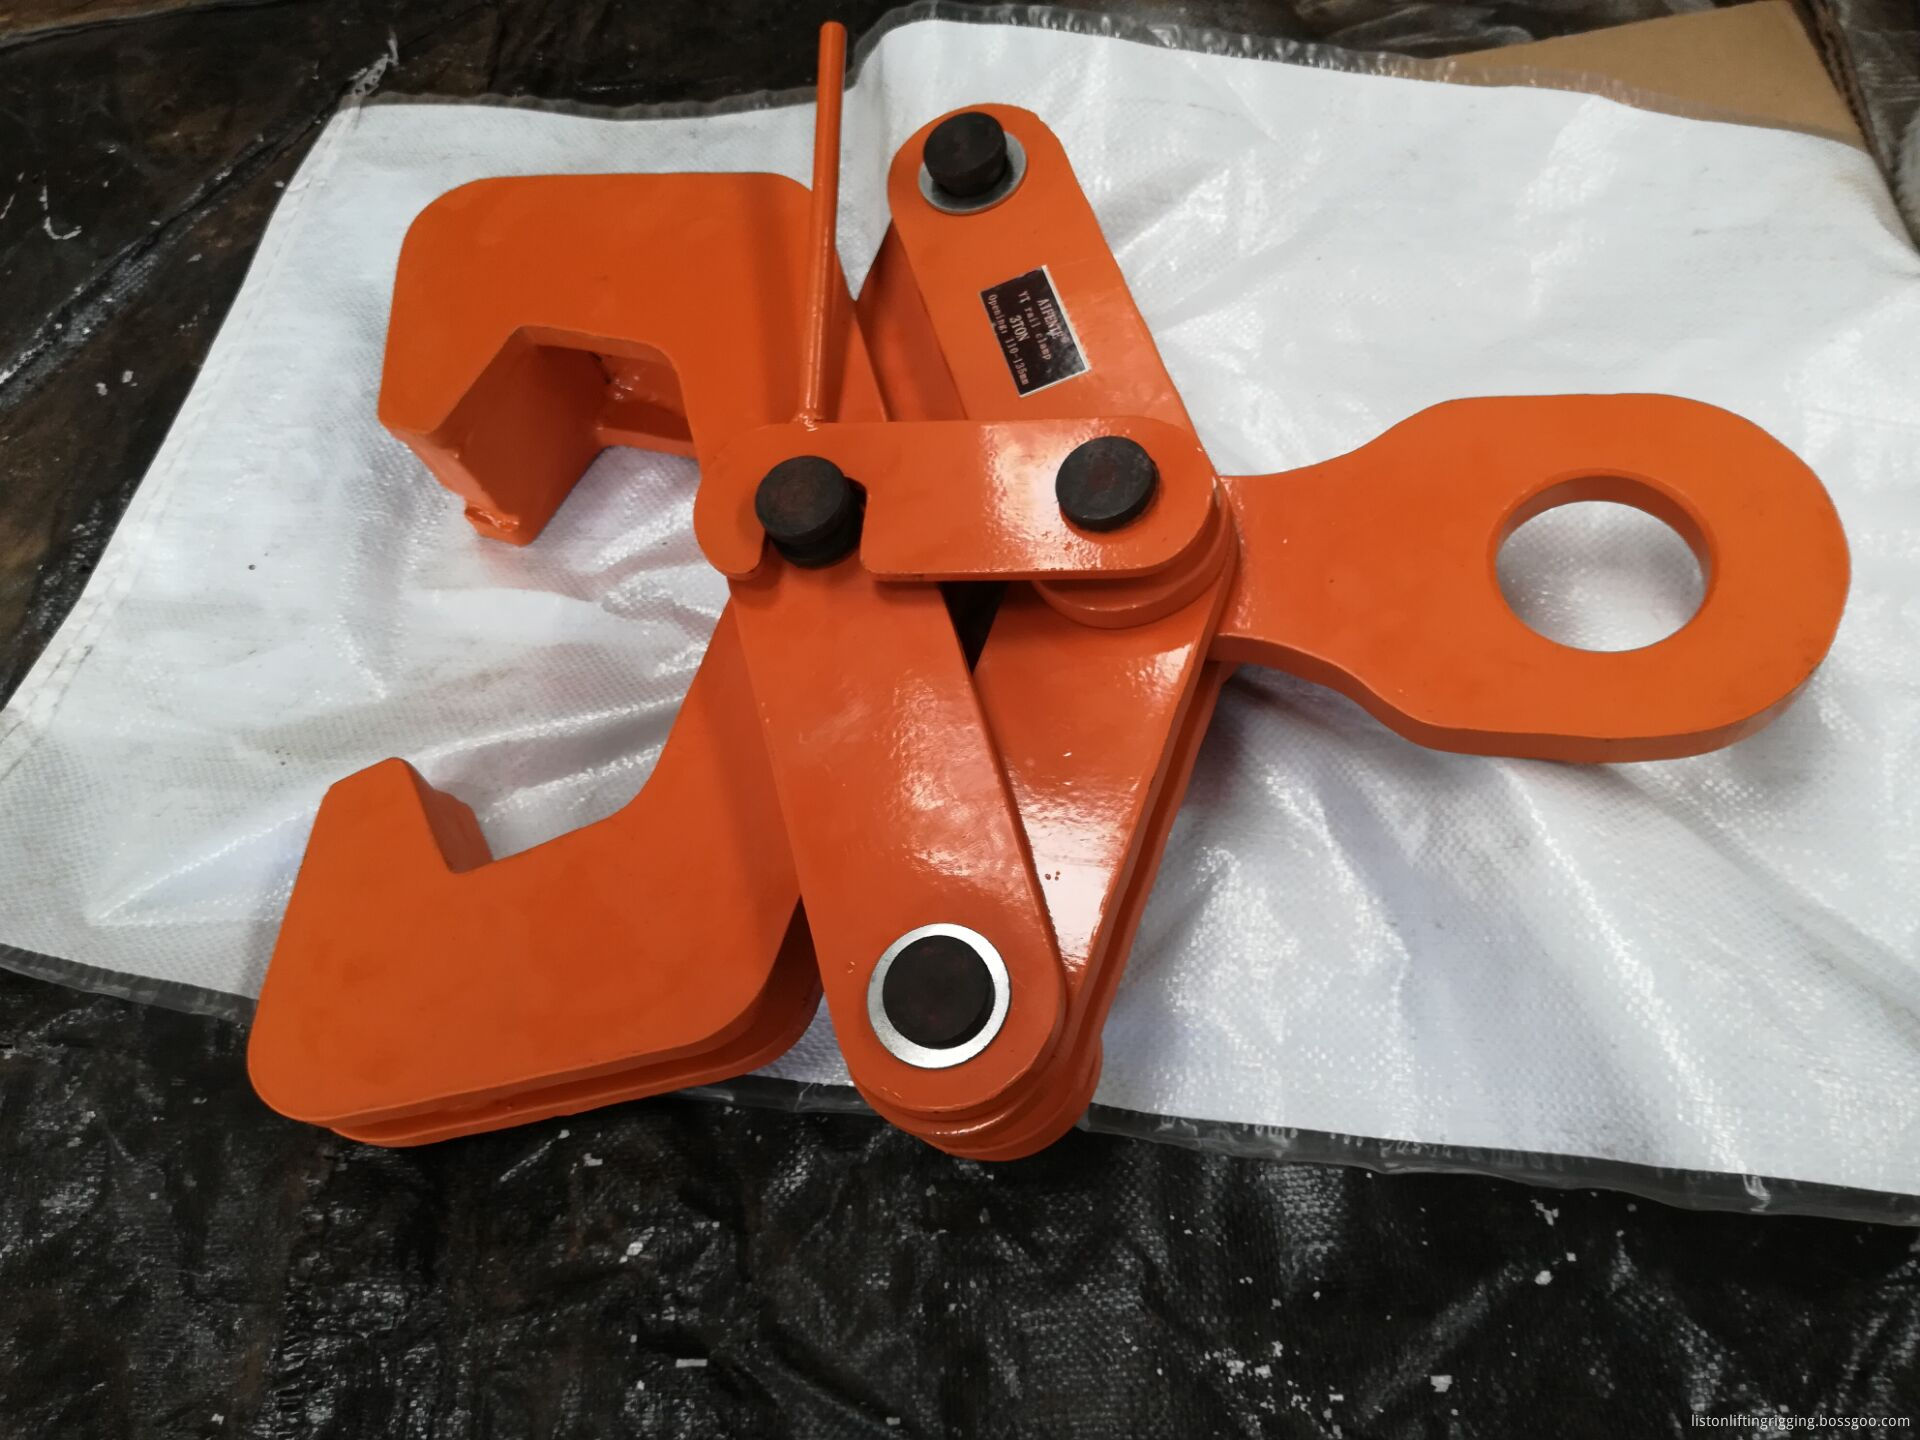 steel plate lifting clamp